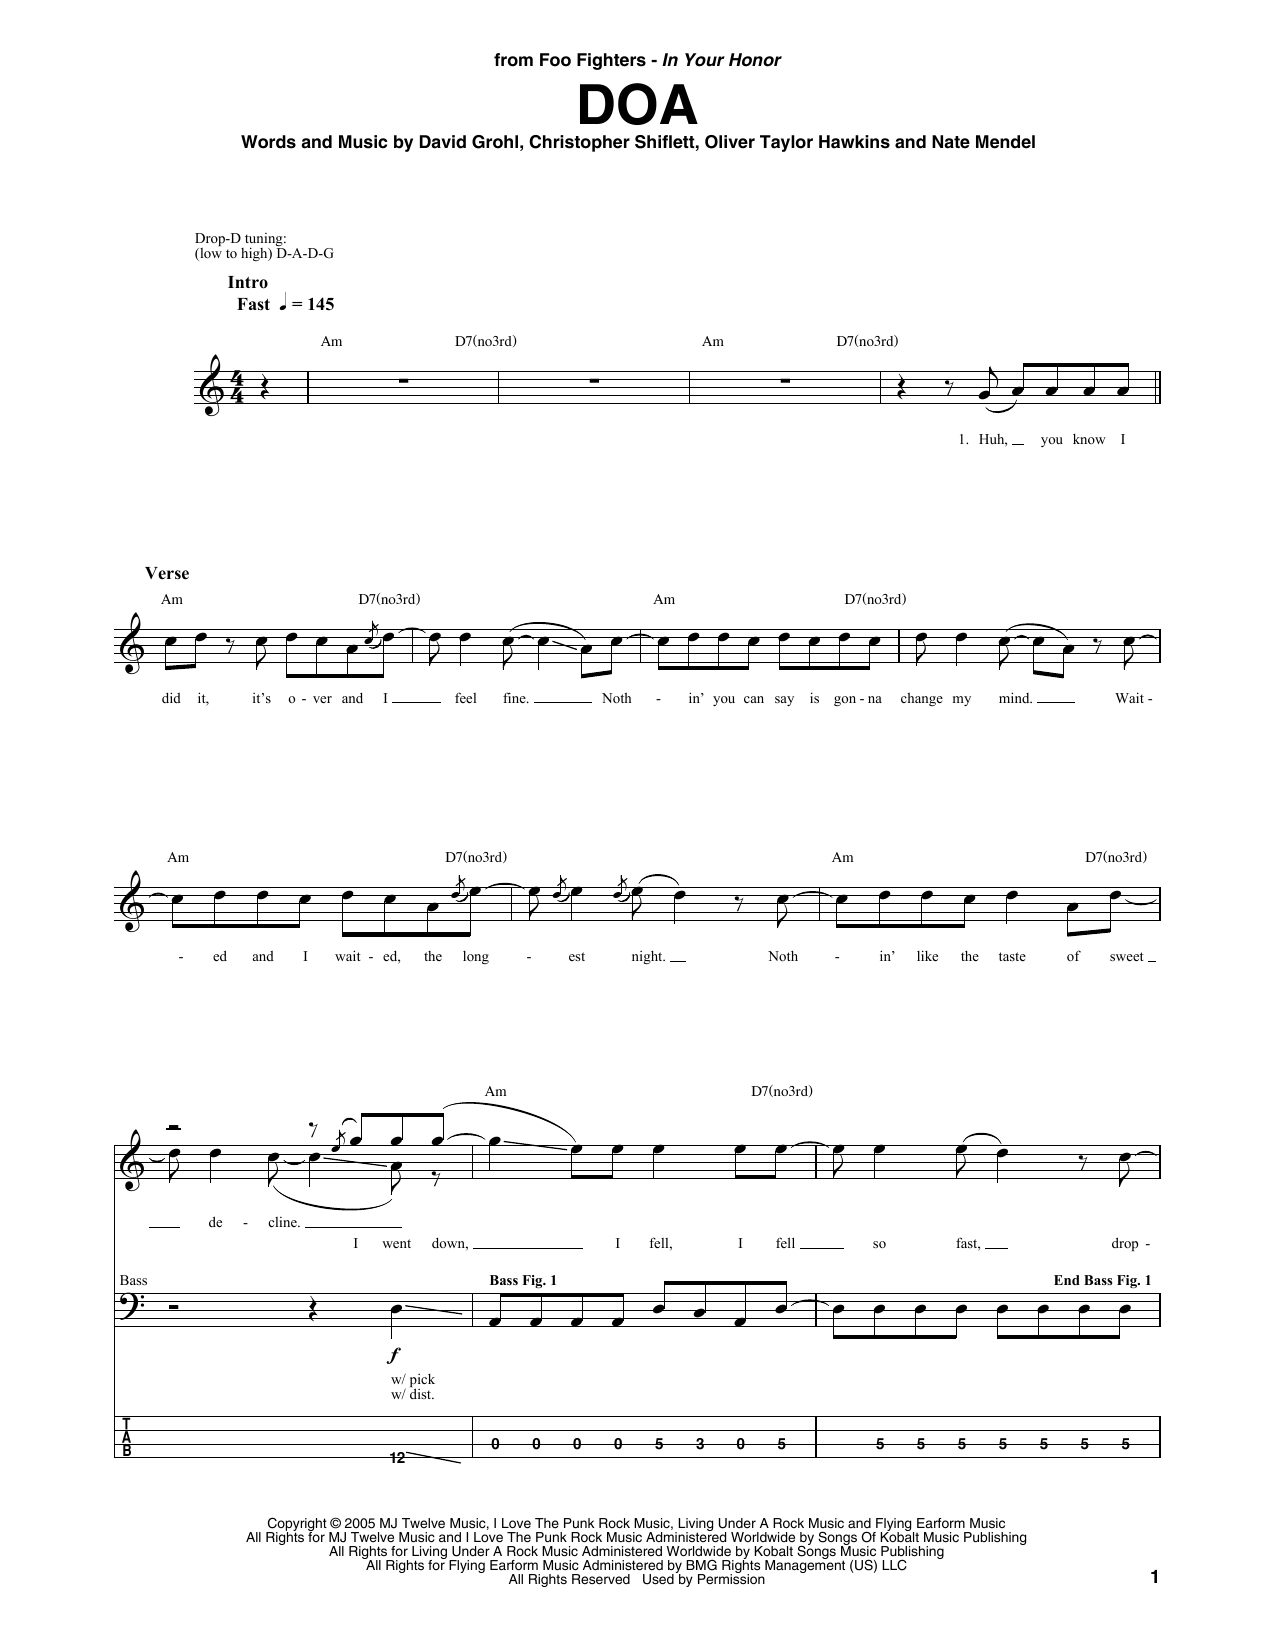 Download Foo Fighters DOA Sheet Music